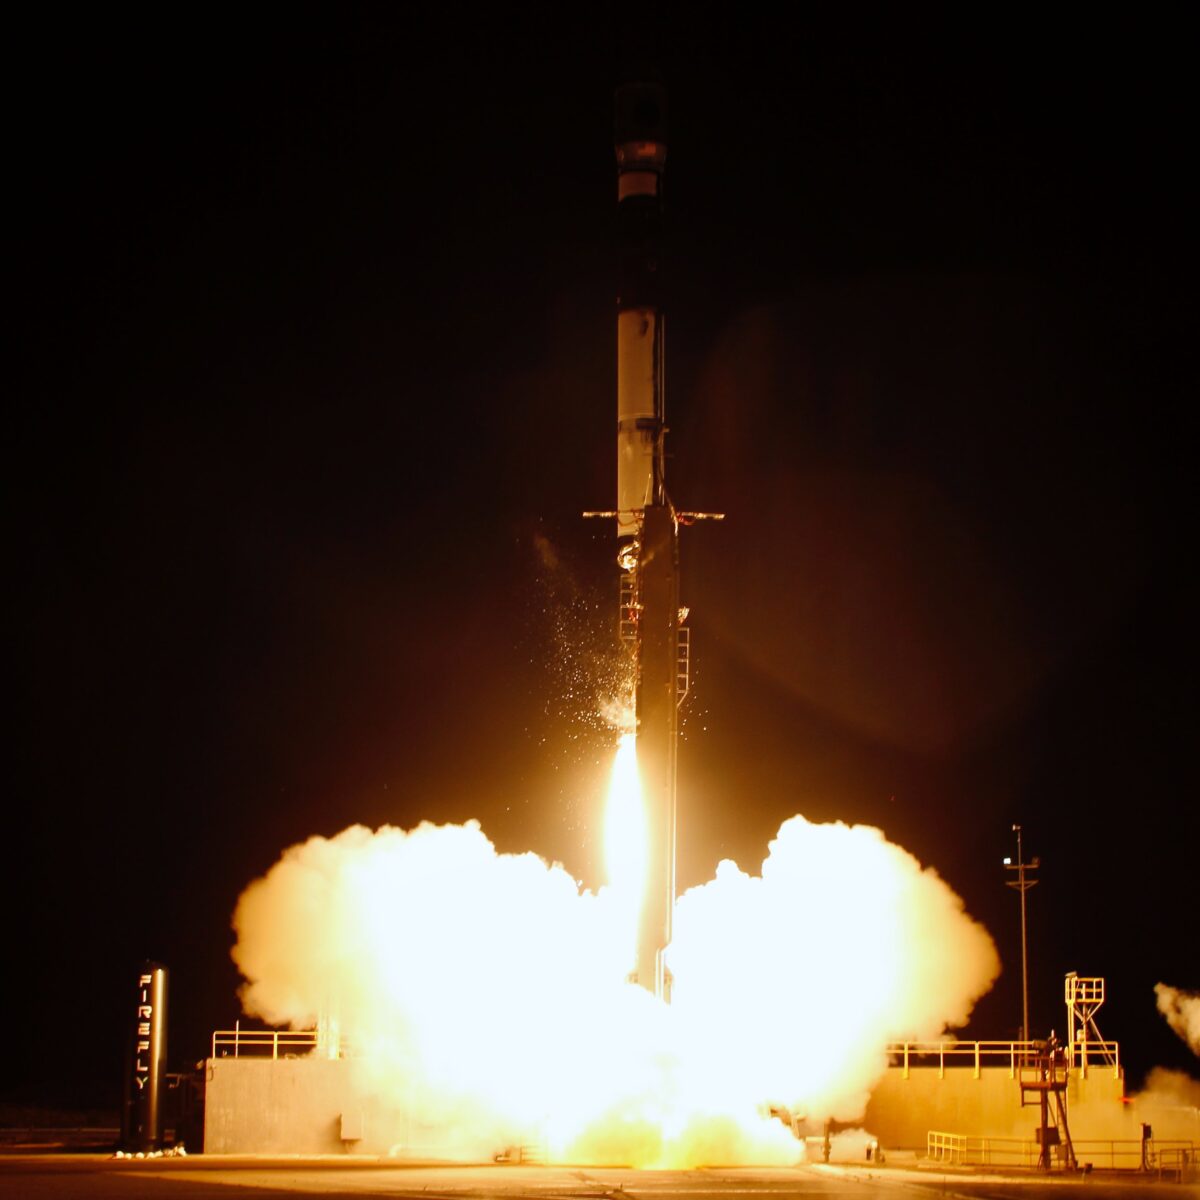 After setting new record for responsive launch, Space Force eyes next challenge